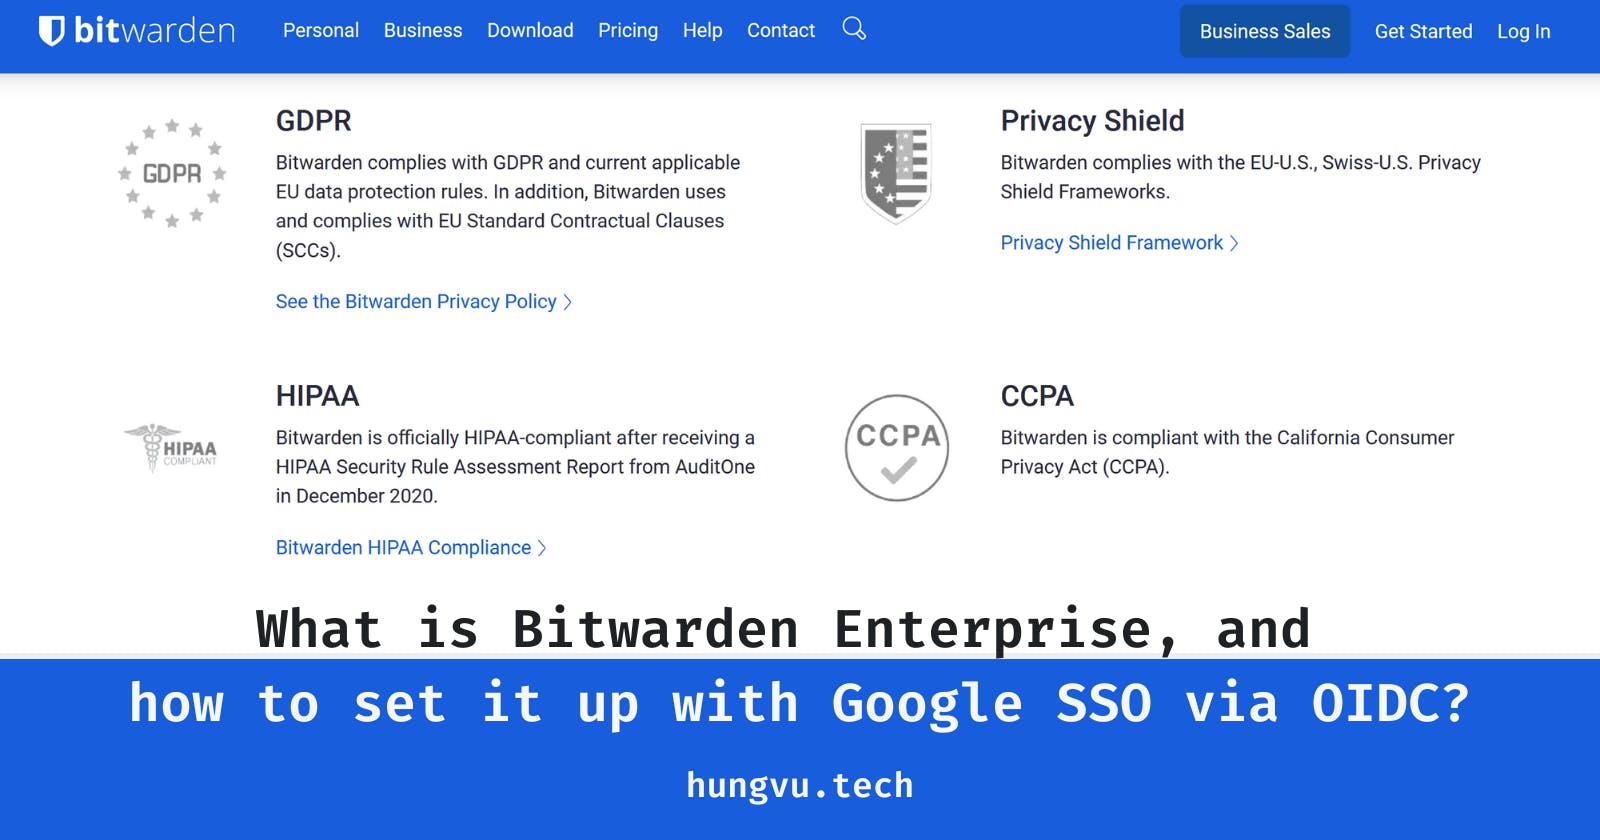 What is Bitwarden Enterprise, and how to set it up with Google SSO via OIDC?